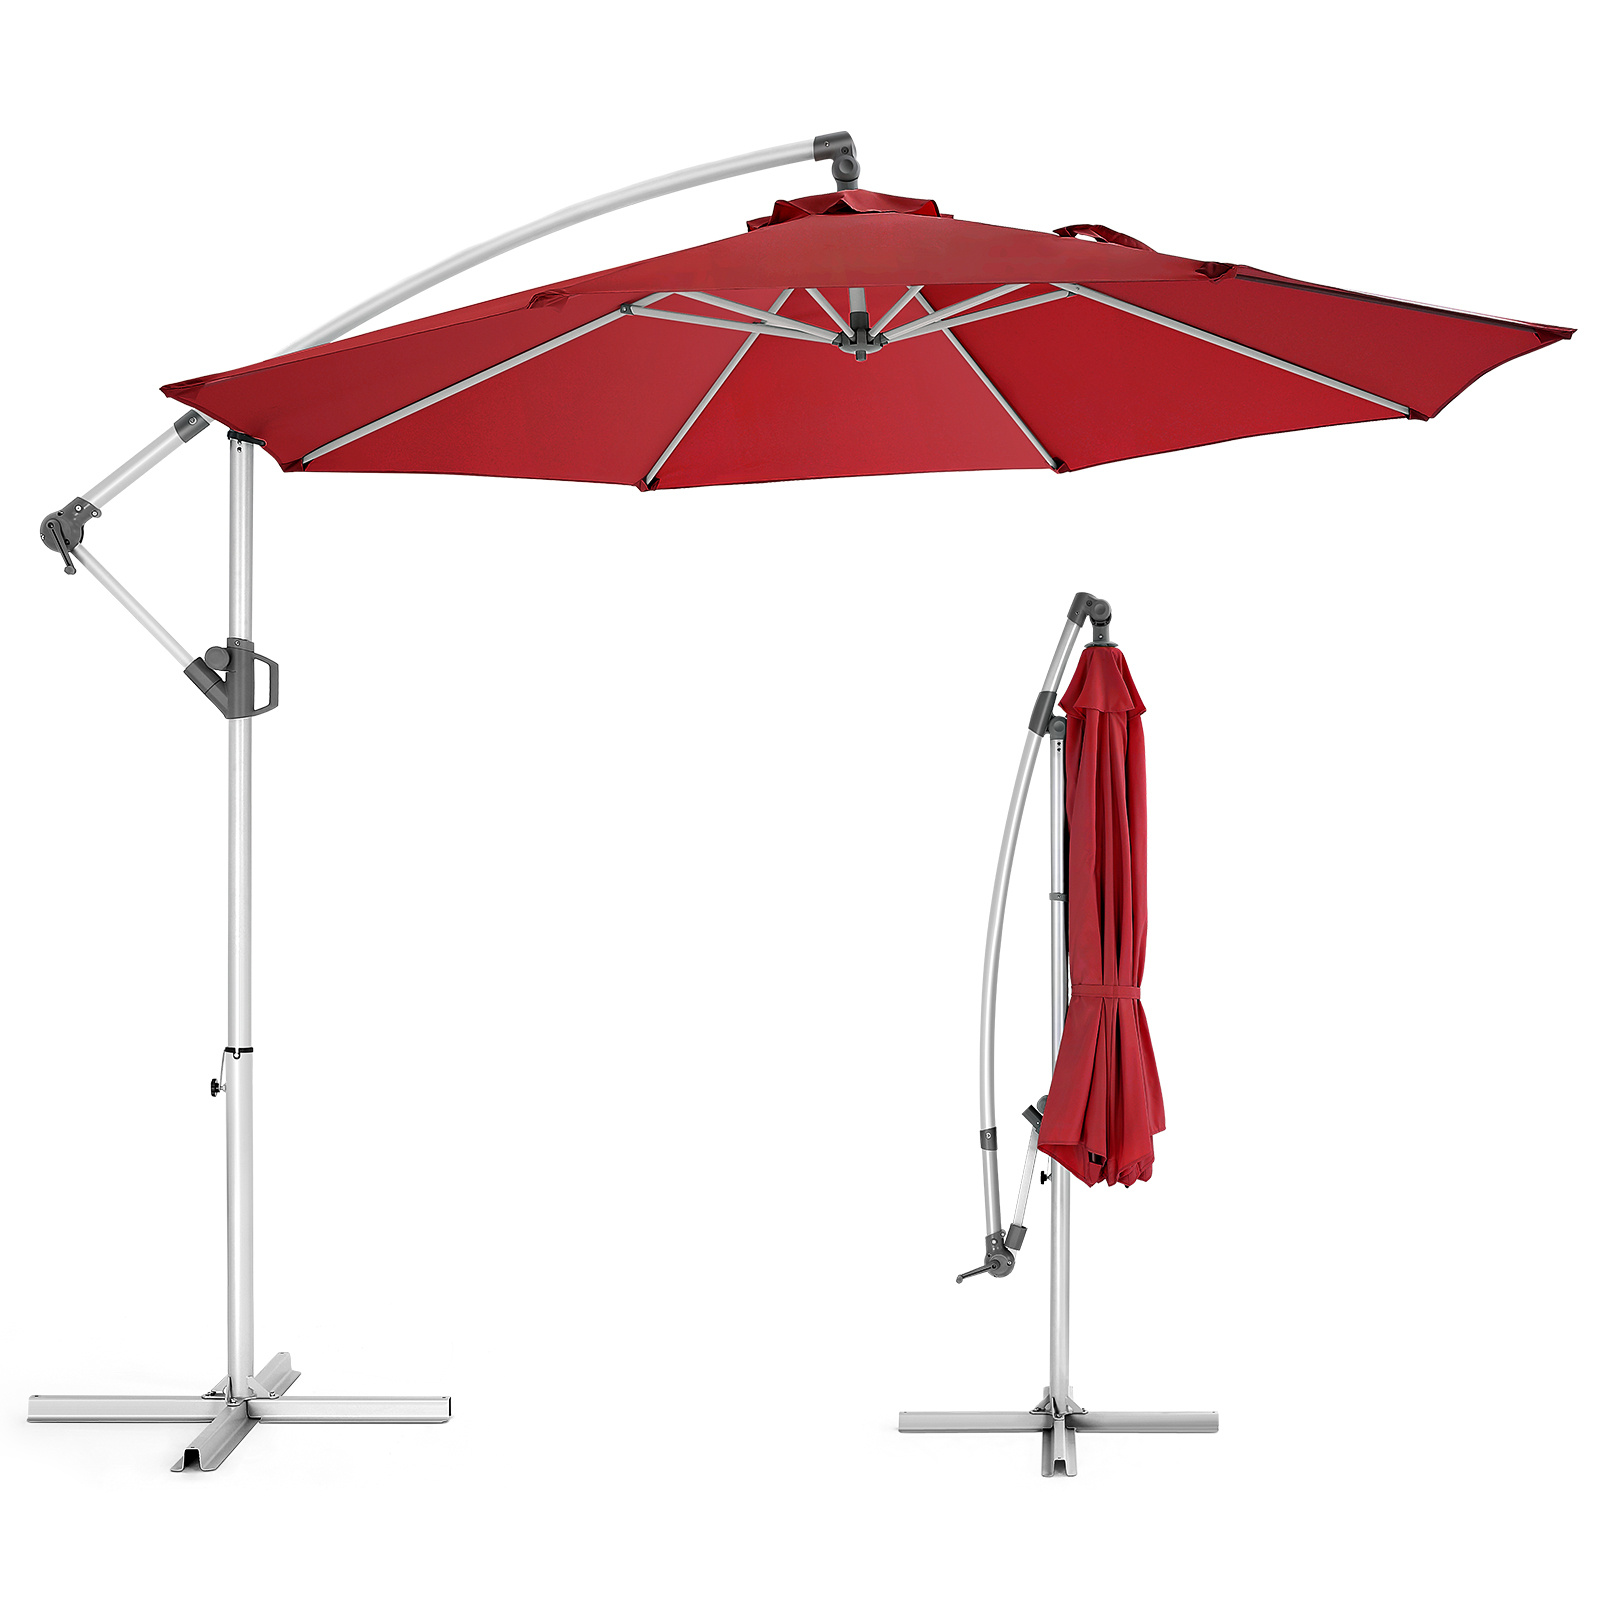 

10ft Offset Patio Umbrella - Hanging Cantilever Outdoor Market Umbrella, 5-year Fade Resistant Upf50 Uv Protection With Easy Tilt Adjustment And Crank (beige)